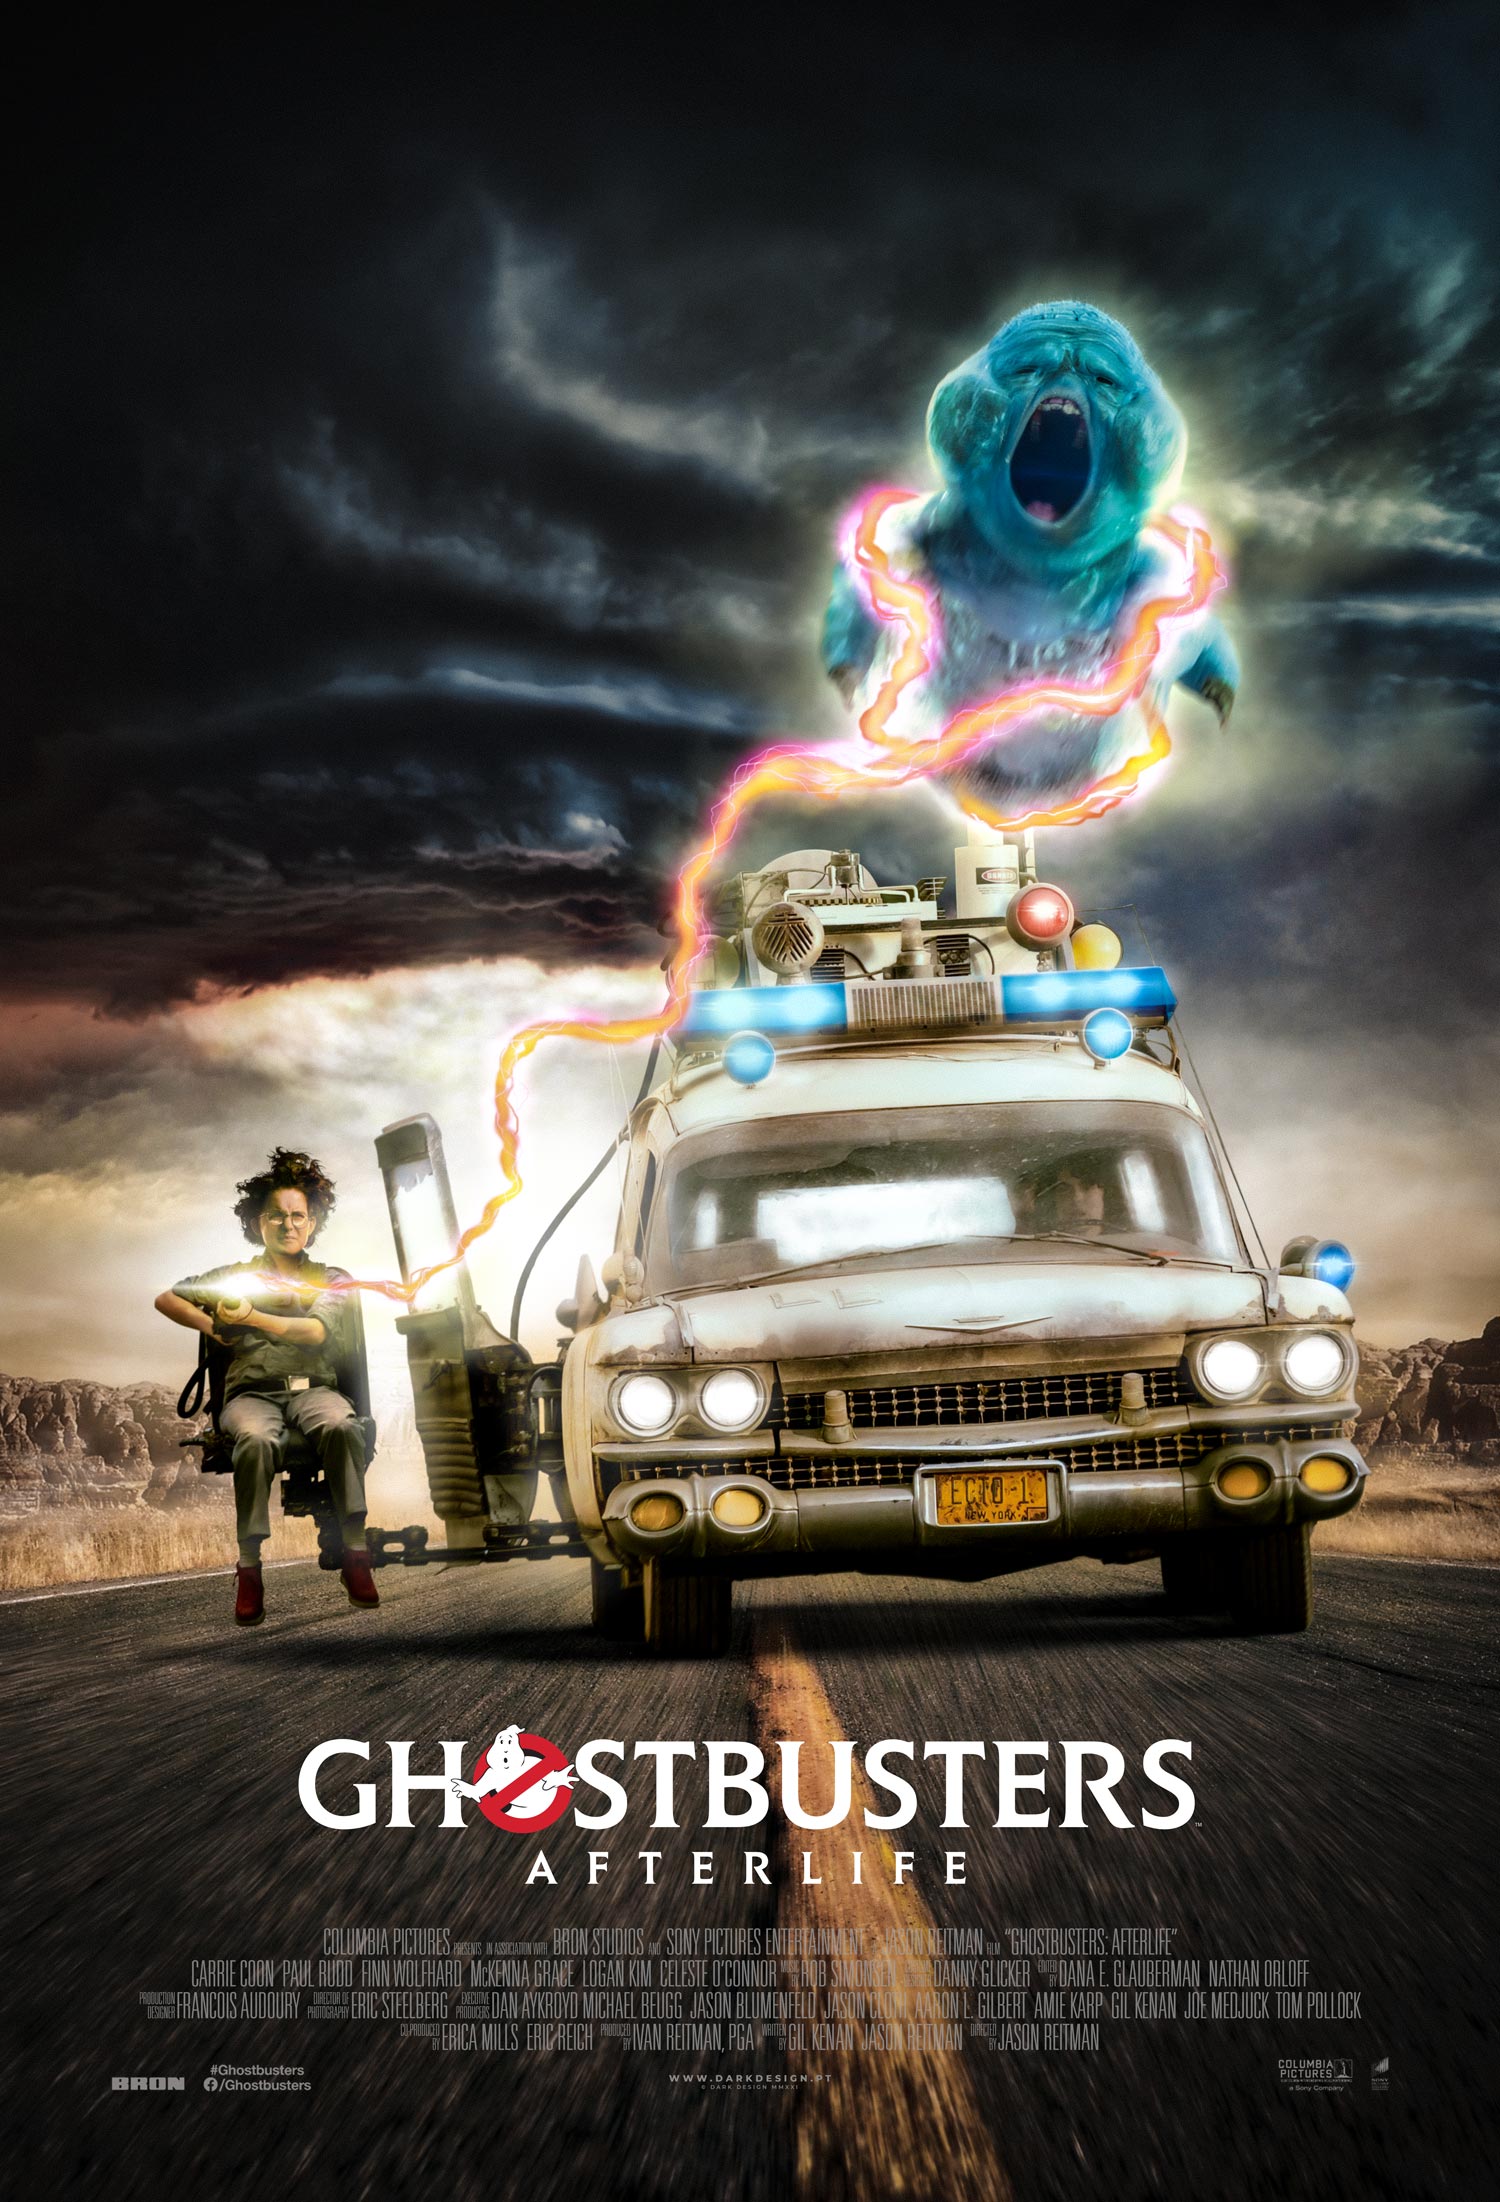 Ghostbusters_Afterlife_Poster.jpg